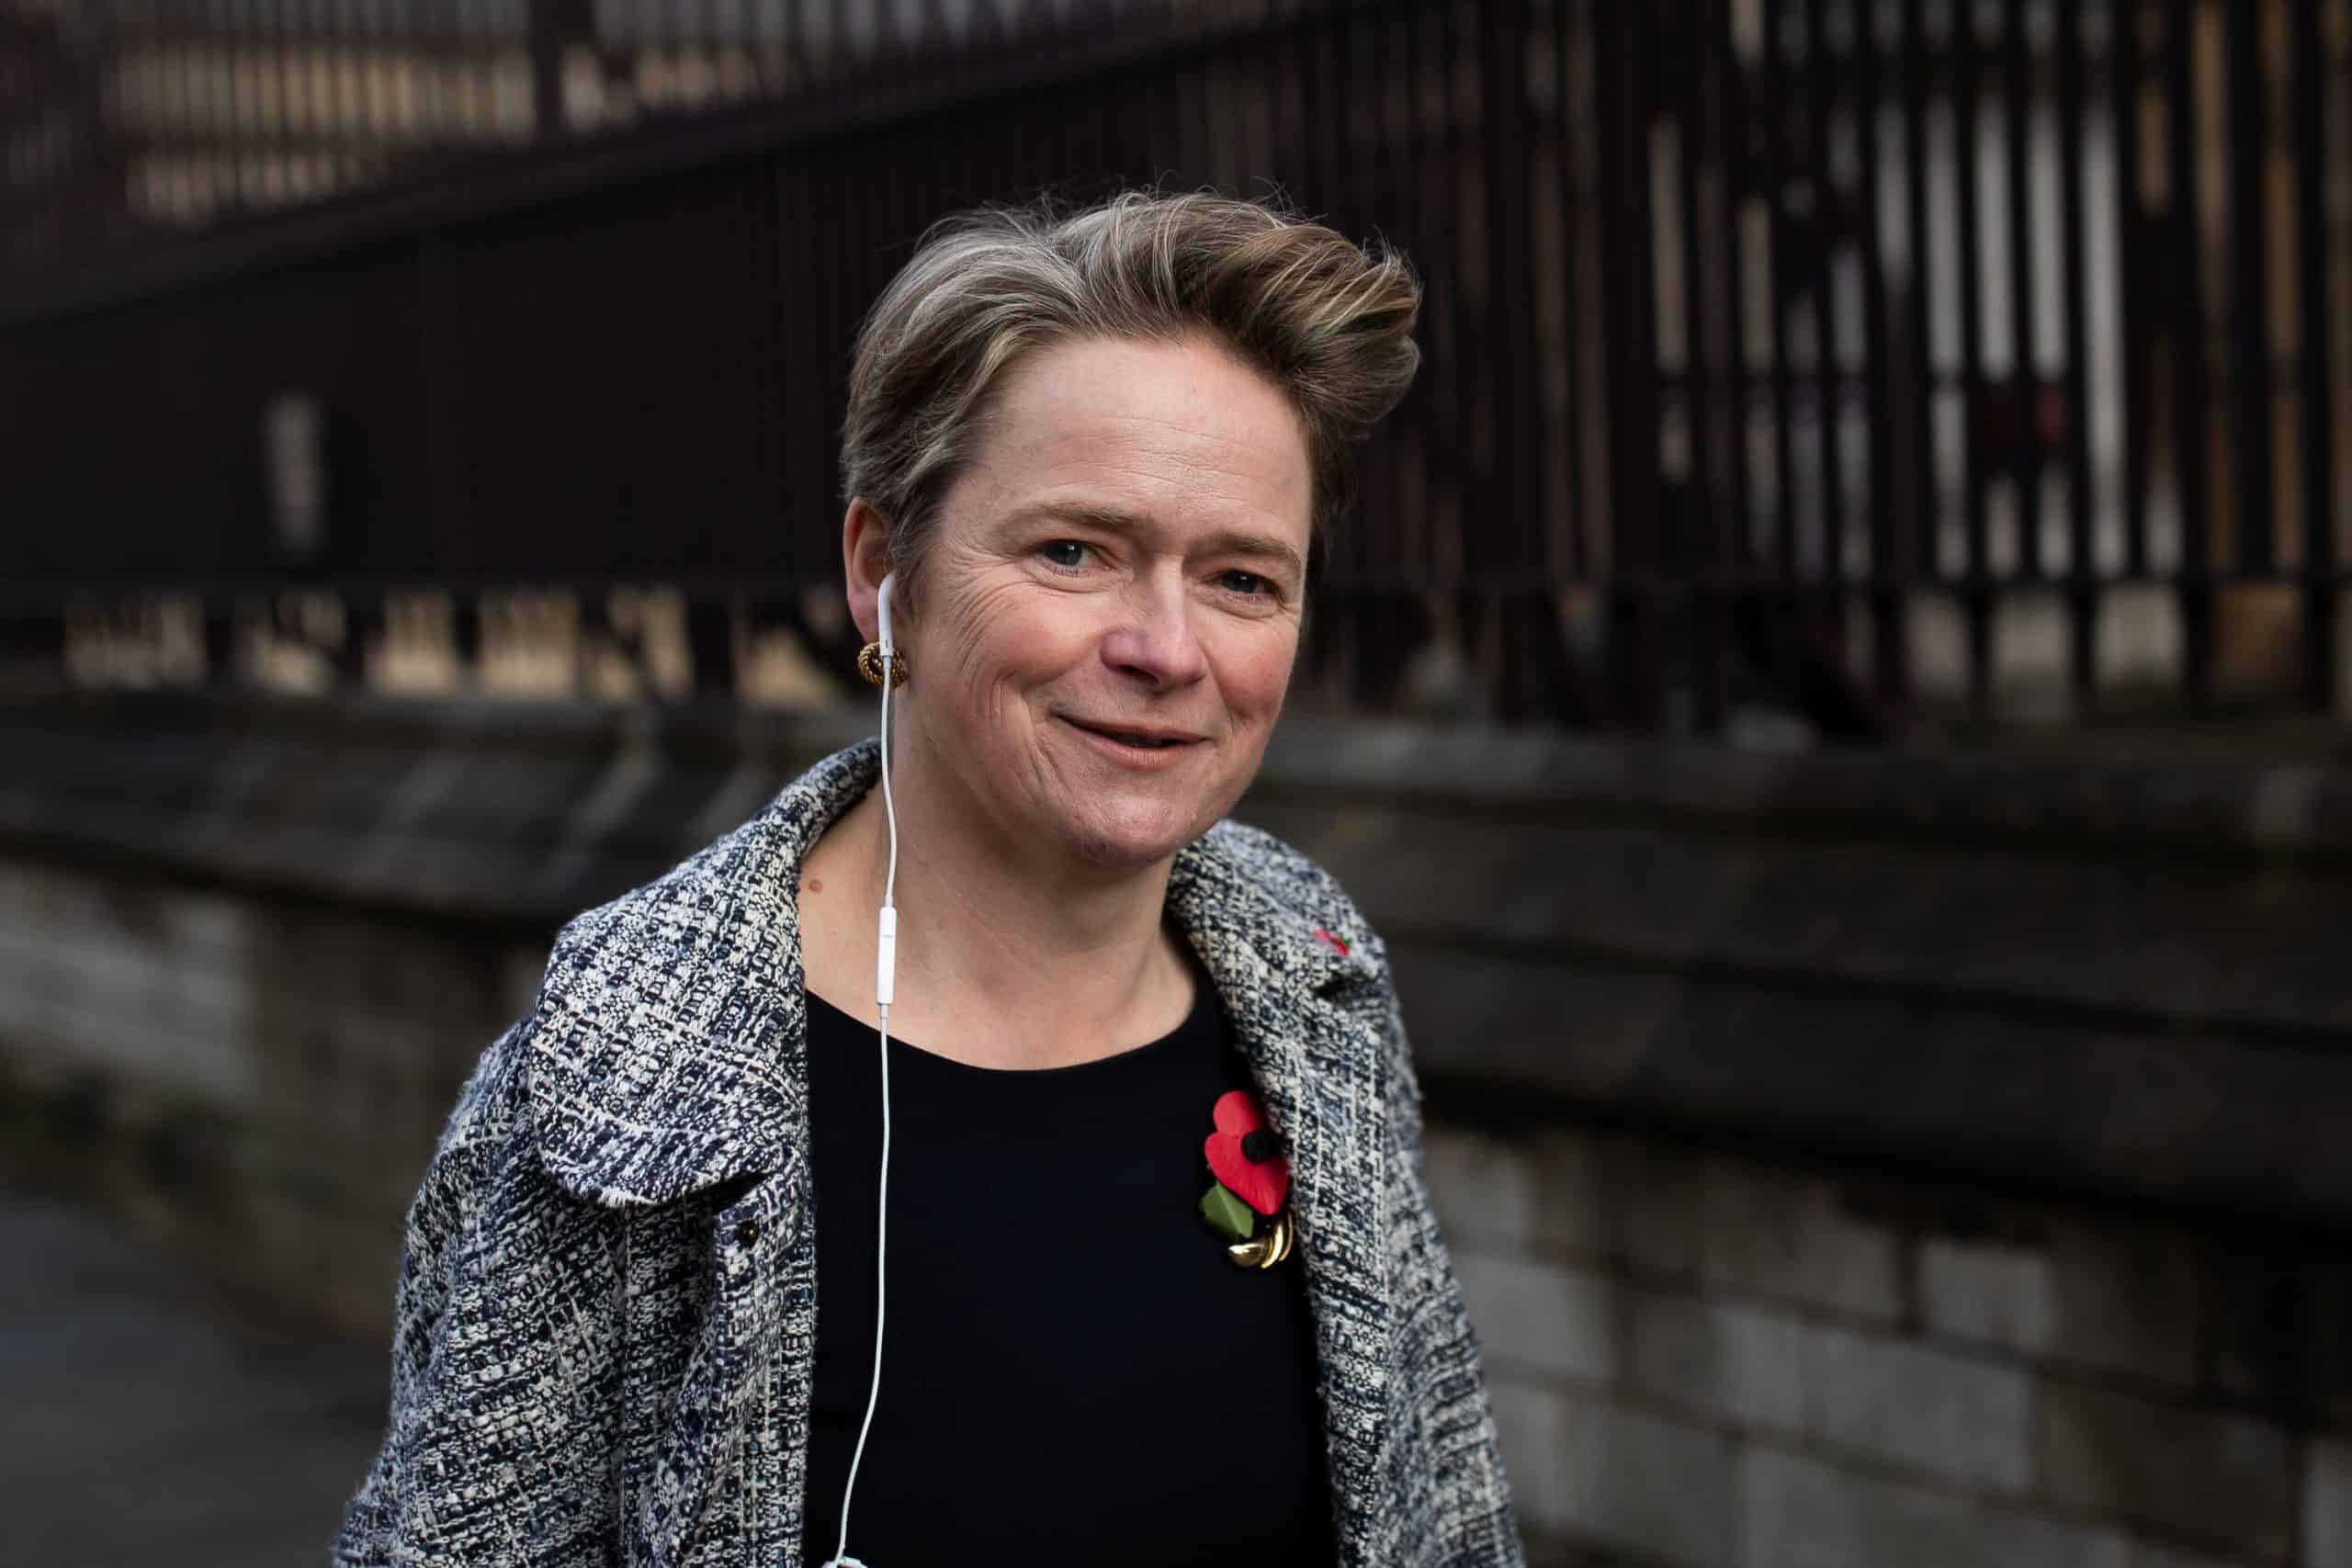 Workers with Covid ‘too scared’ to get tested due to lack of cash support, Dido Harding says